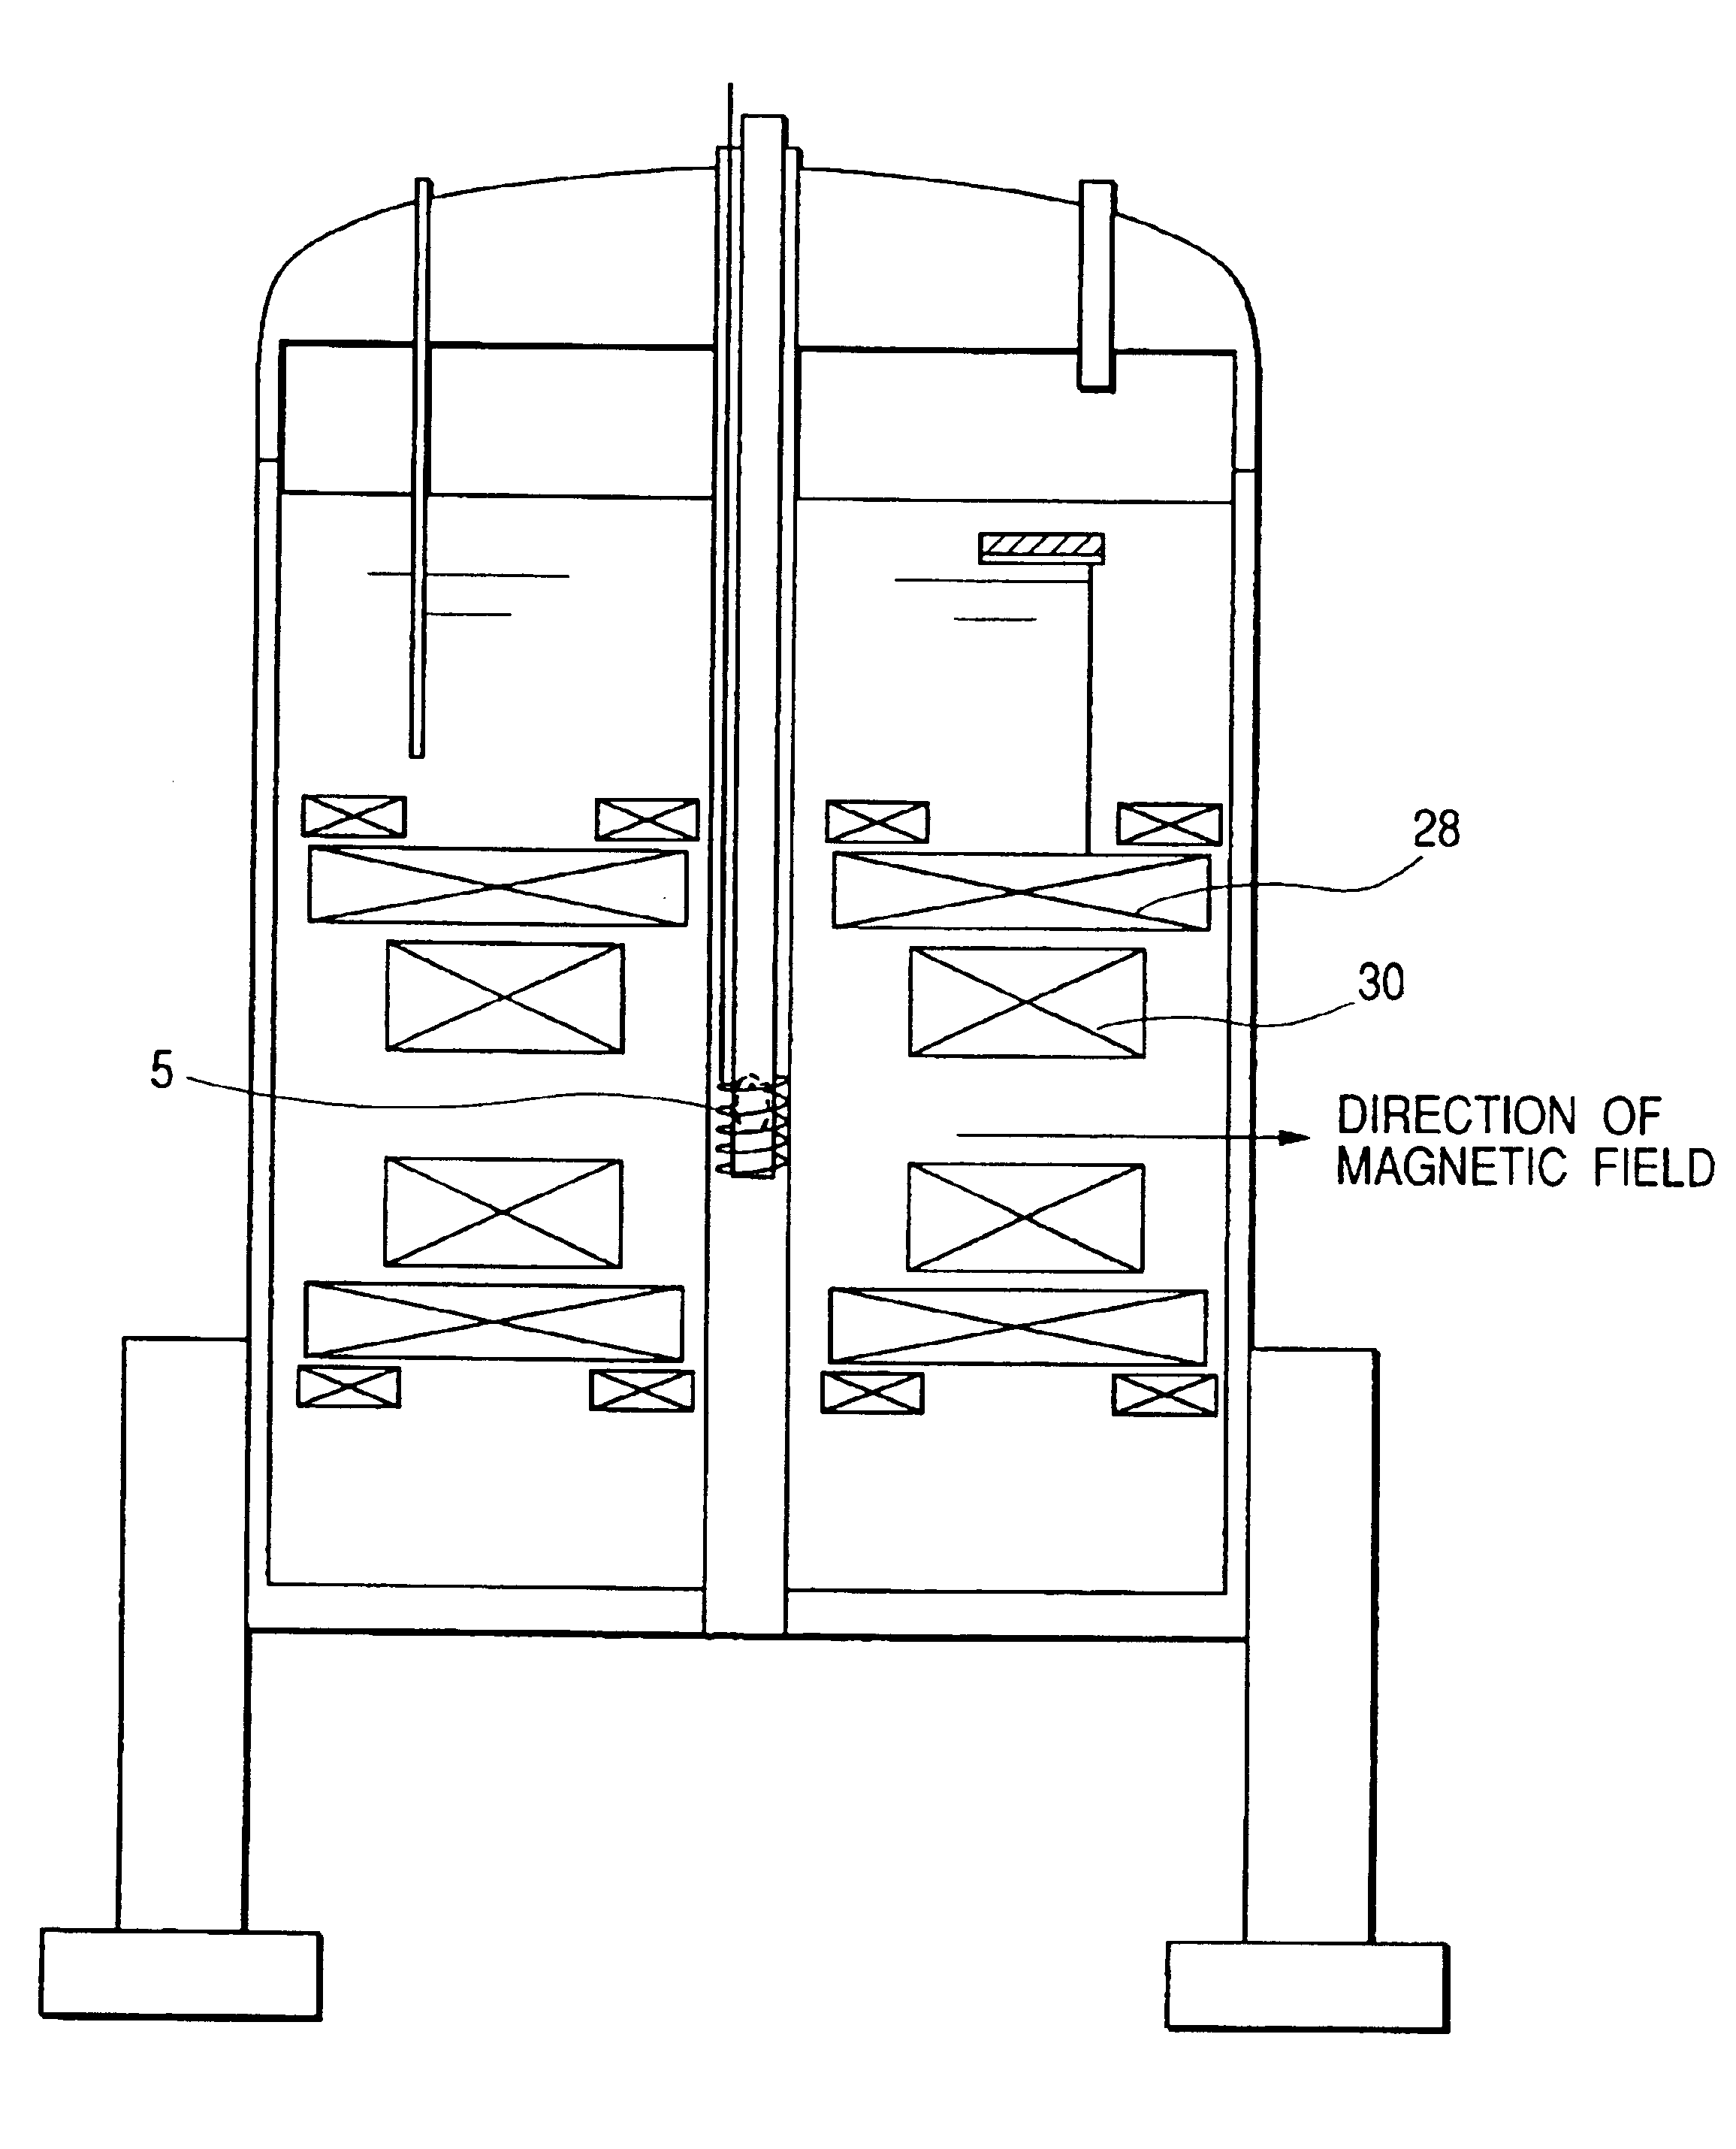 Supersensitive nuclear magnetic resonance micro imaging apparatus